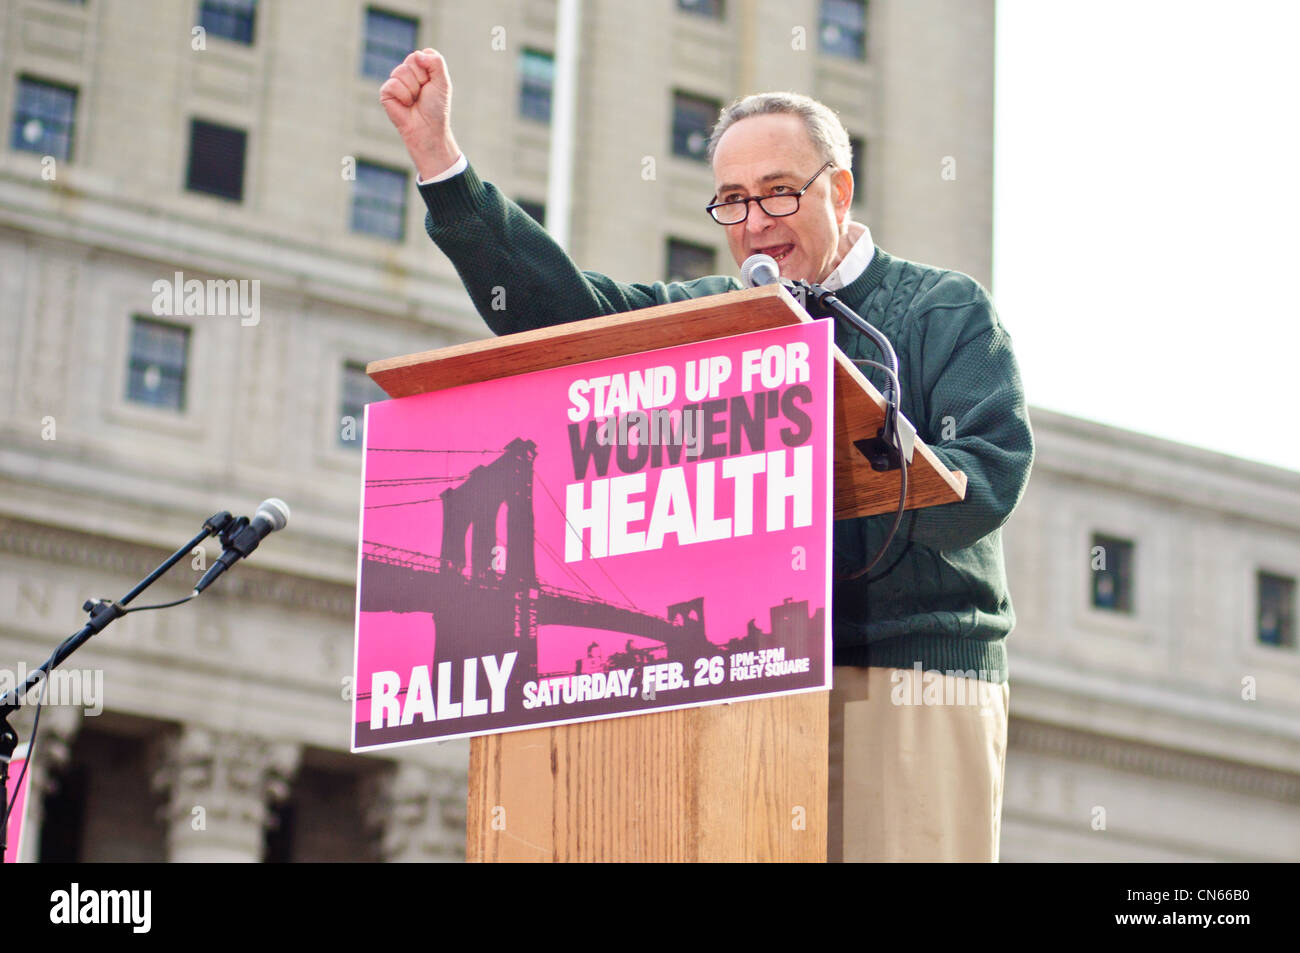 Senator Churck Schumer speaking at the Rally for Women's Health at Foley Square in Manhattan. Feb. 26, 2011 Stock Photo